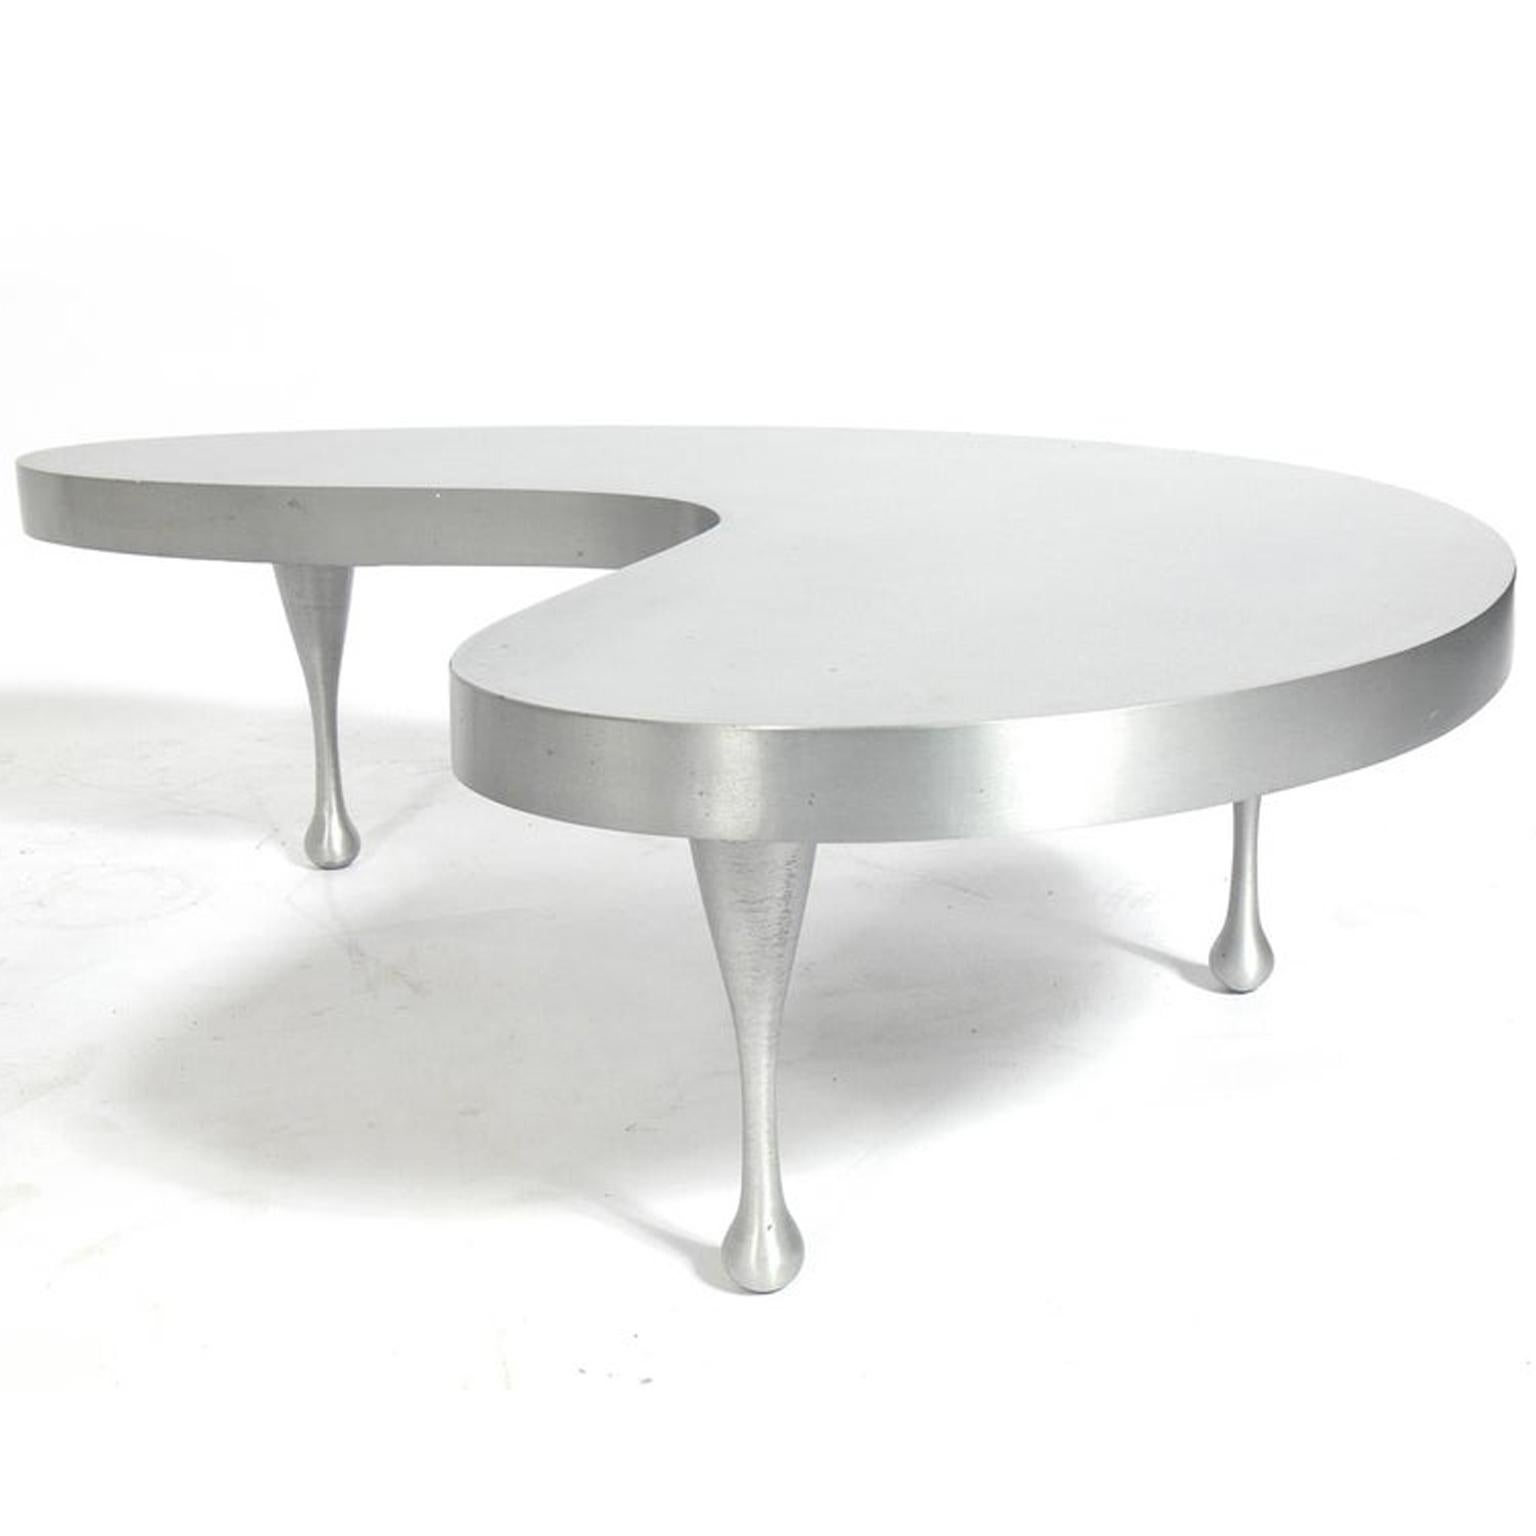 Pair of biomorphic low slung cast aluminum tables, designed by Frederick Kiesler in the 1930s, these are a re-edition made in conjunction with Lillian Kiesler for the Jason McCoy Gallery, circa 1990s. The larger table measures 25.4 H x 87.63 x 57.15